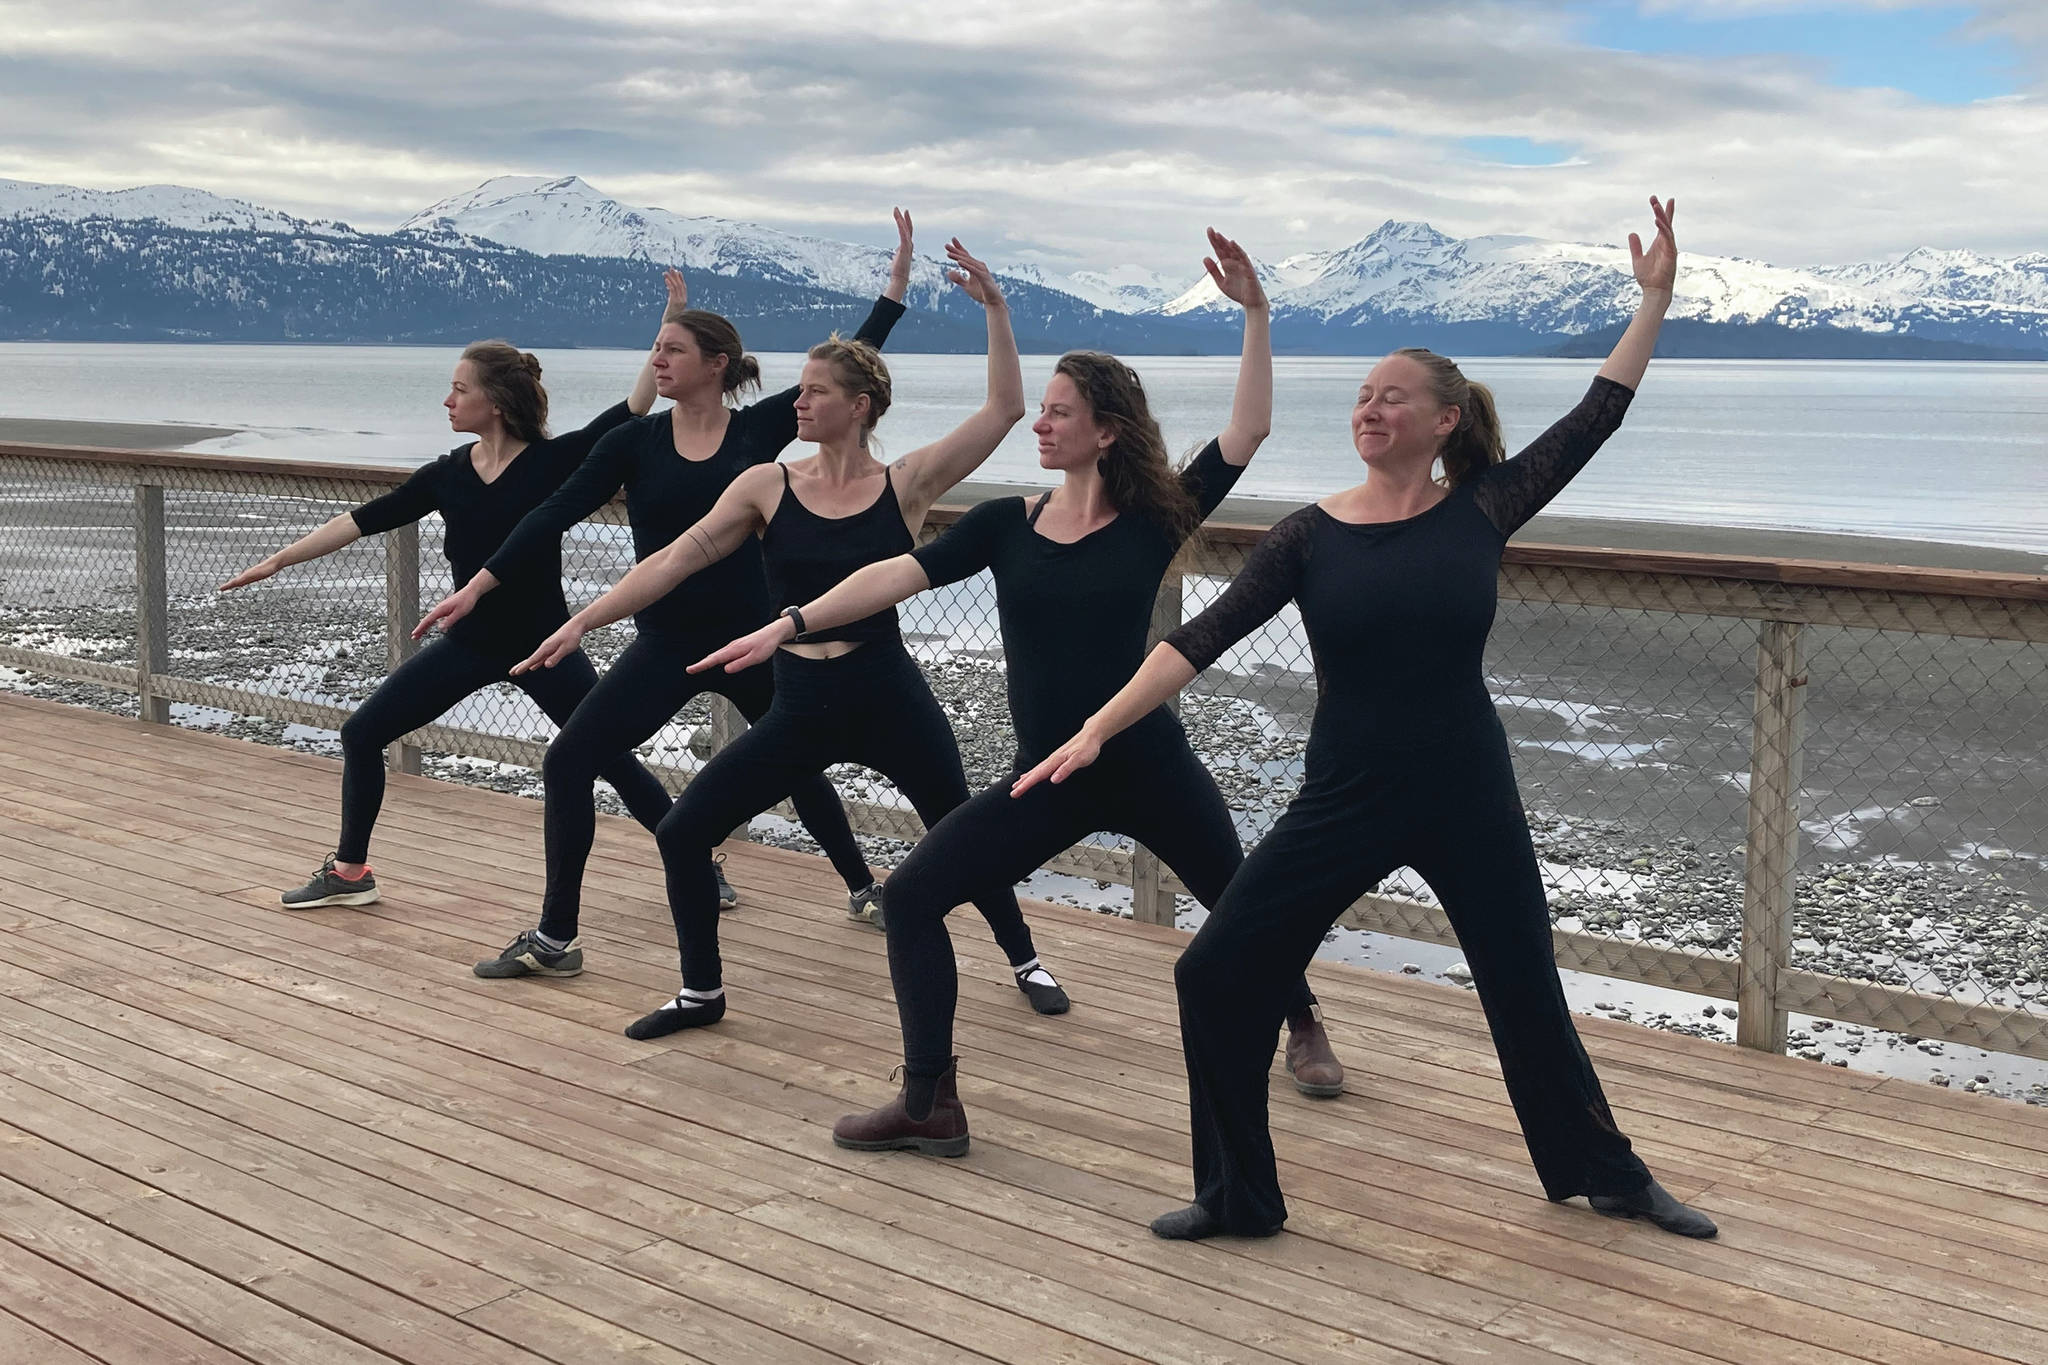 Members of the Motivity Dance Collective rehearse at the Kachemak Shellfish Growers Association deck in Homer, Alaska. From left to right, Emily Rogers, Emilie Springer, Bridget Doran, Rhoslyn Anderson, Breezy Berryman. Not pictured is Kammi Matson. (Photo by Kammi Matson)